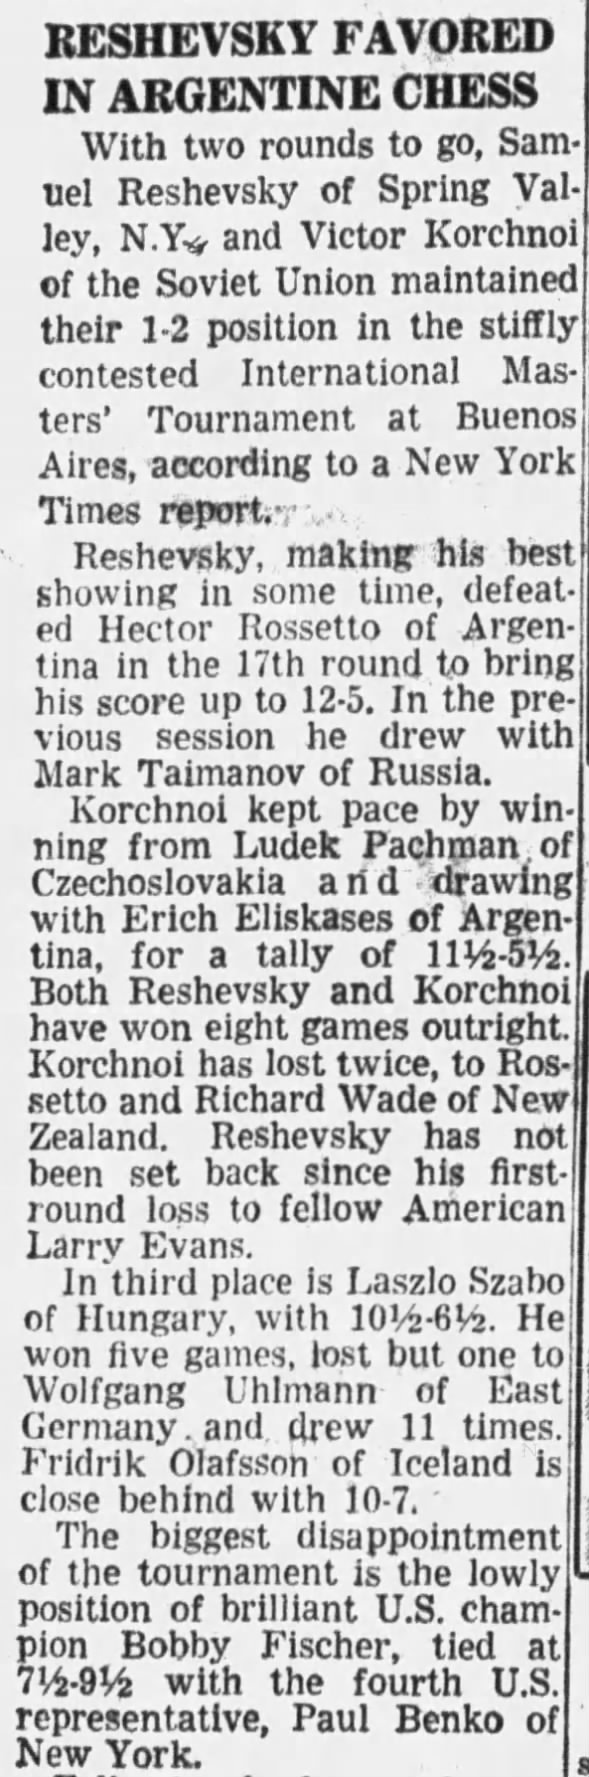 Reshevsky Favored In Argentine Chess